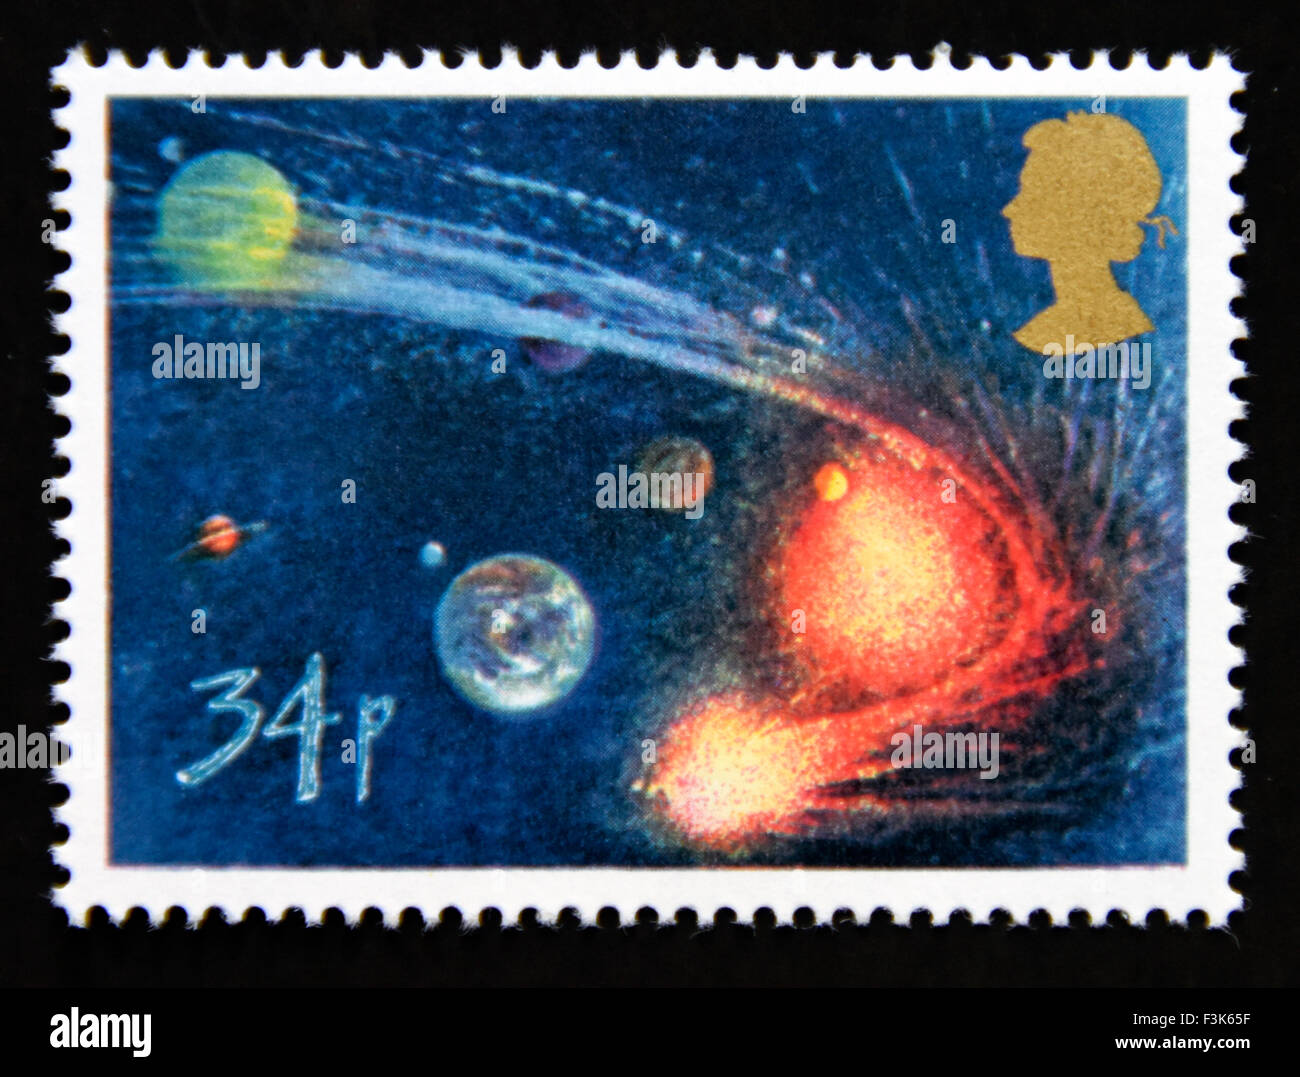 Postage stamp. Great Britain. Queen Elizabeth II. 1986. Appearance of Halley's Comet. Comet orbitting Sun and Planets. 34p. Stock Photo